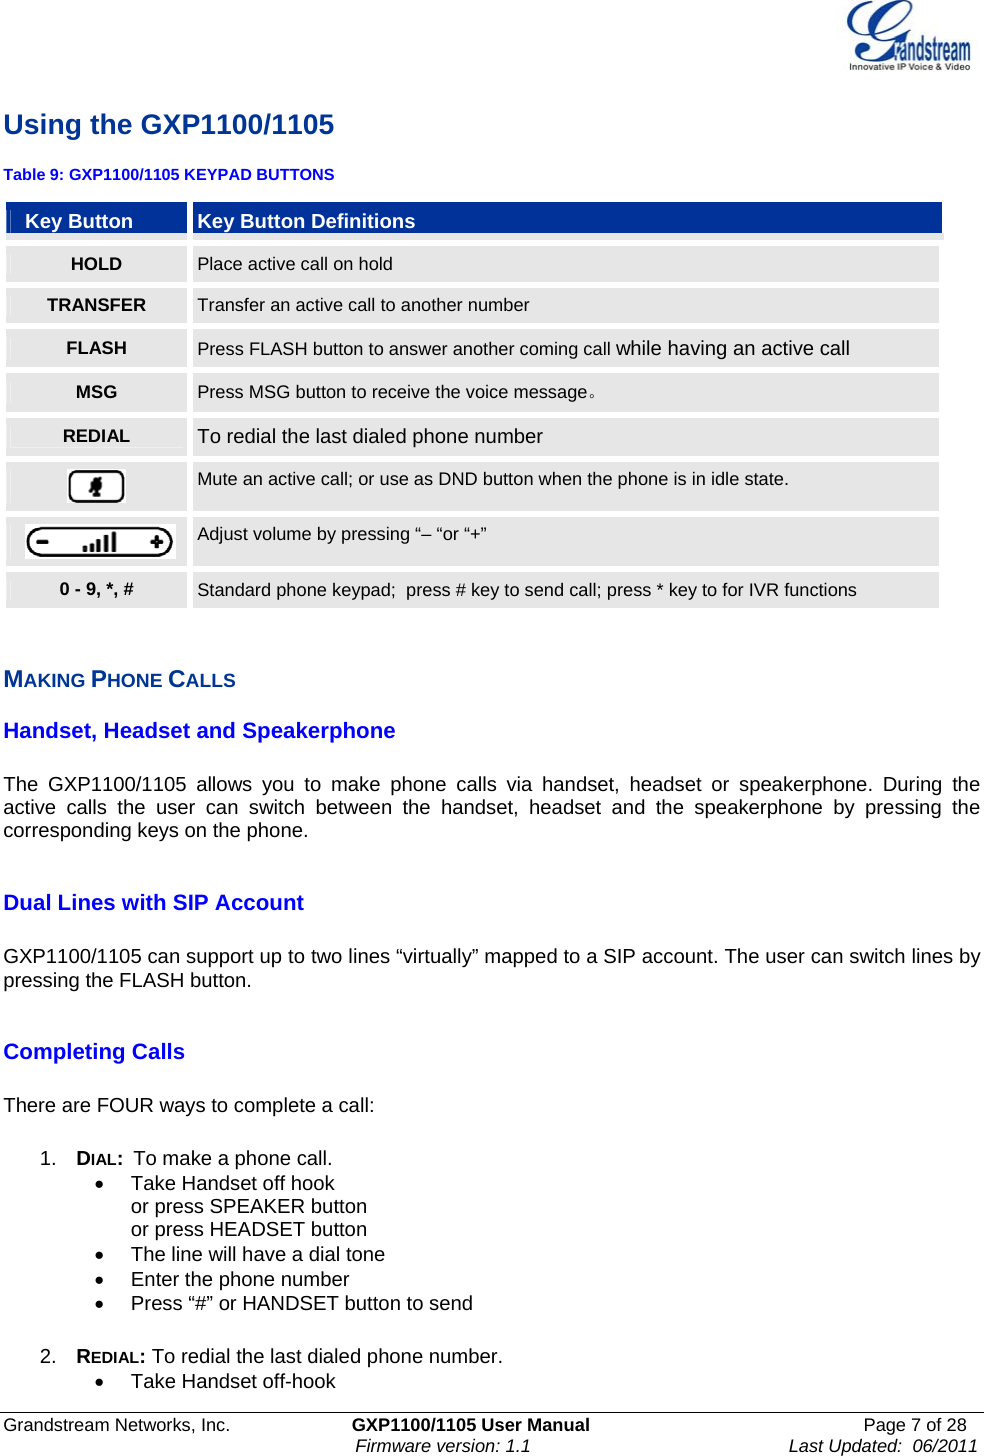    Grandstream Networks, Inc.                        GXP1100/1105 User Manual                                                      Page 7 of 28                                                                      Firmware version: 1.1                                                   Last Updated:  06/2011  Using the GXP1100/1105 Table 9: GXP1100/1105 KEYPAD BUTTONS Key Button  Key Button Definitions HOLD  Place active call on hold TRANSFER  Transfer an active call to another number FLASH  Press FLASH button to answer another coming call while having an active call MSG  Press MSG button to receive the voice message。 REDIAL  To redial the last dialed phone number  Mute an active call; or use as DND button when the phone is in idle state.  Adjust volume by pressing “– “or “+” 0 - 9, *, #  Standard phone keypad;  press # key to send call; press * key to for IVR functions   MAKING PHONE CALLS Handset, Headset and Speakerphone  The GXP1100/1105 allows you to make phone calls via handset, headset or speakerphone. During the active calls the user can switch between the handset, headset and the speakerphone by pressing the corresponding keys on the phone.  Dual Lines with SIP Account  GXP1100/1105 can support up to two lines “virtually” mapped to a SIP account. The user can switch lines by pressing the FLASH button.  Completing Calls  There are FOUR ways to complete a call:  1.  DIAL:  To make a phone call. •  Take Handset off hook  or press SPEAKER button or press HEADSET button  •  The line will have a dial tone •  Enter the phone number •  Press “#” or HANDSET button to send  2.  REDIAL: To redial the last dialed phone number. •  Take Handset off-hook 